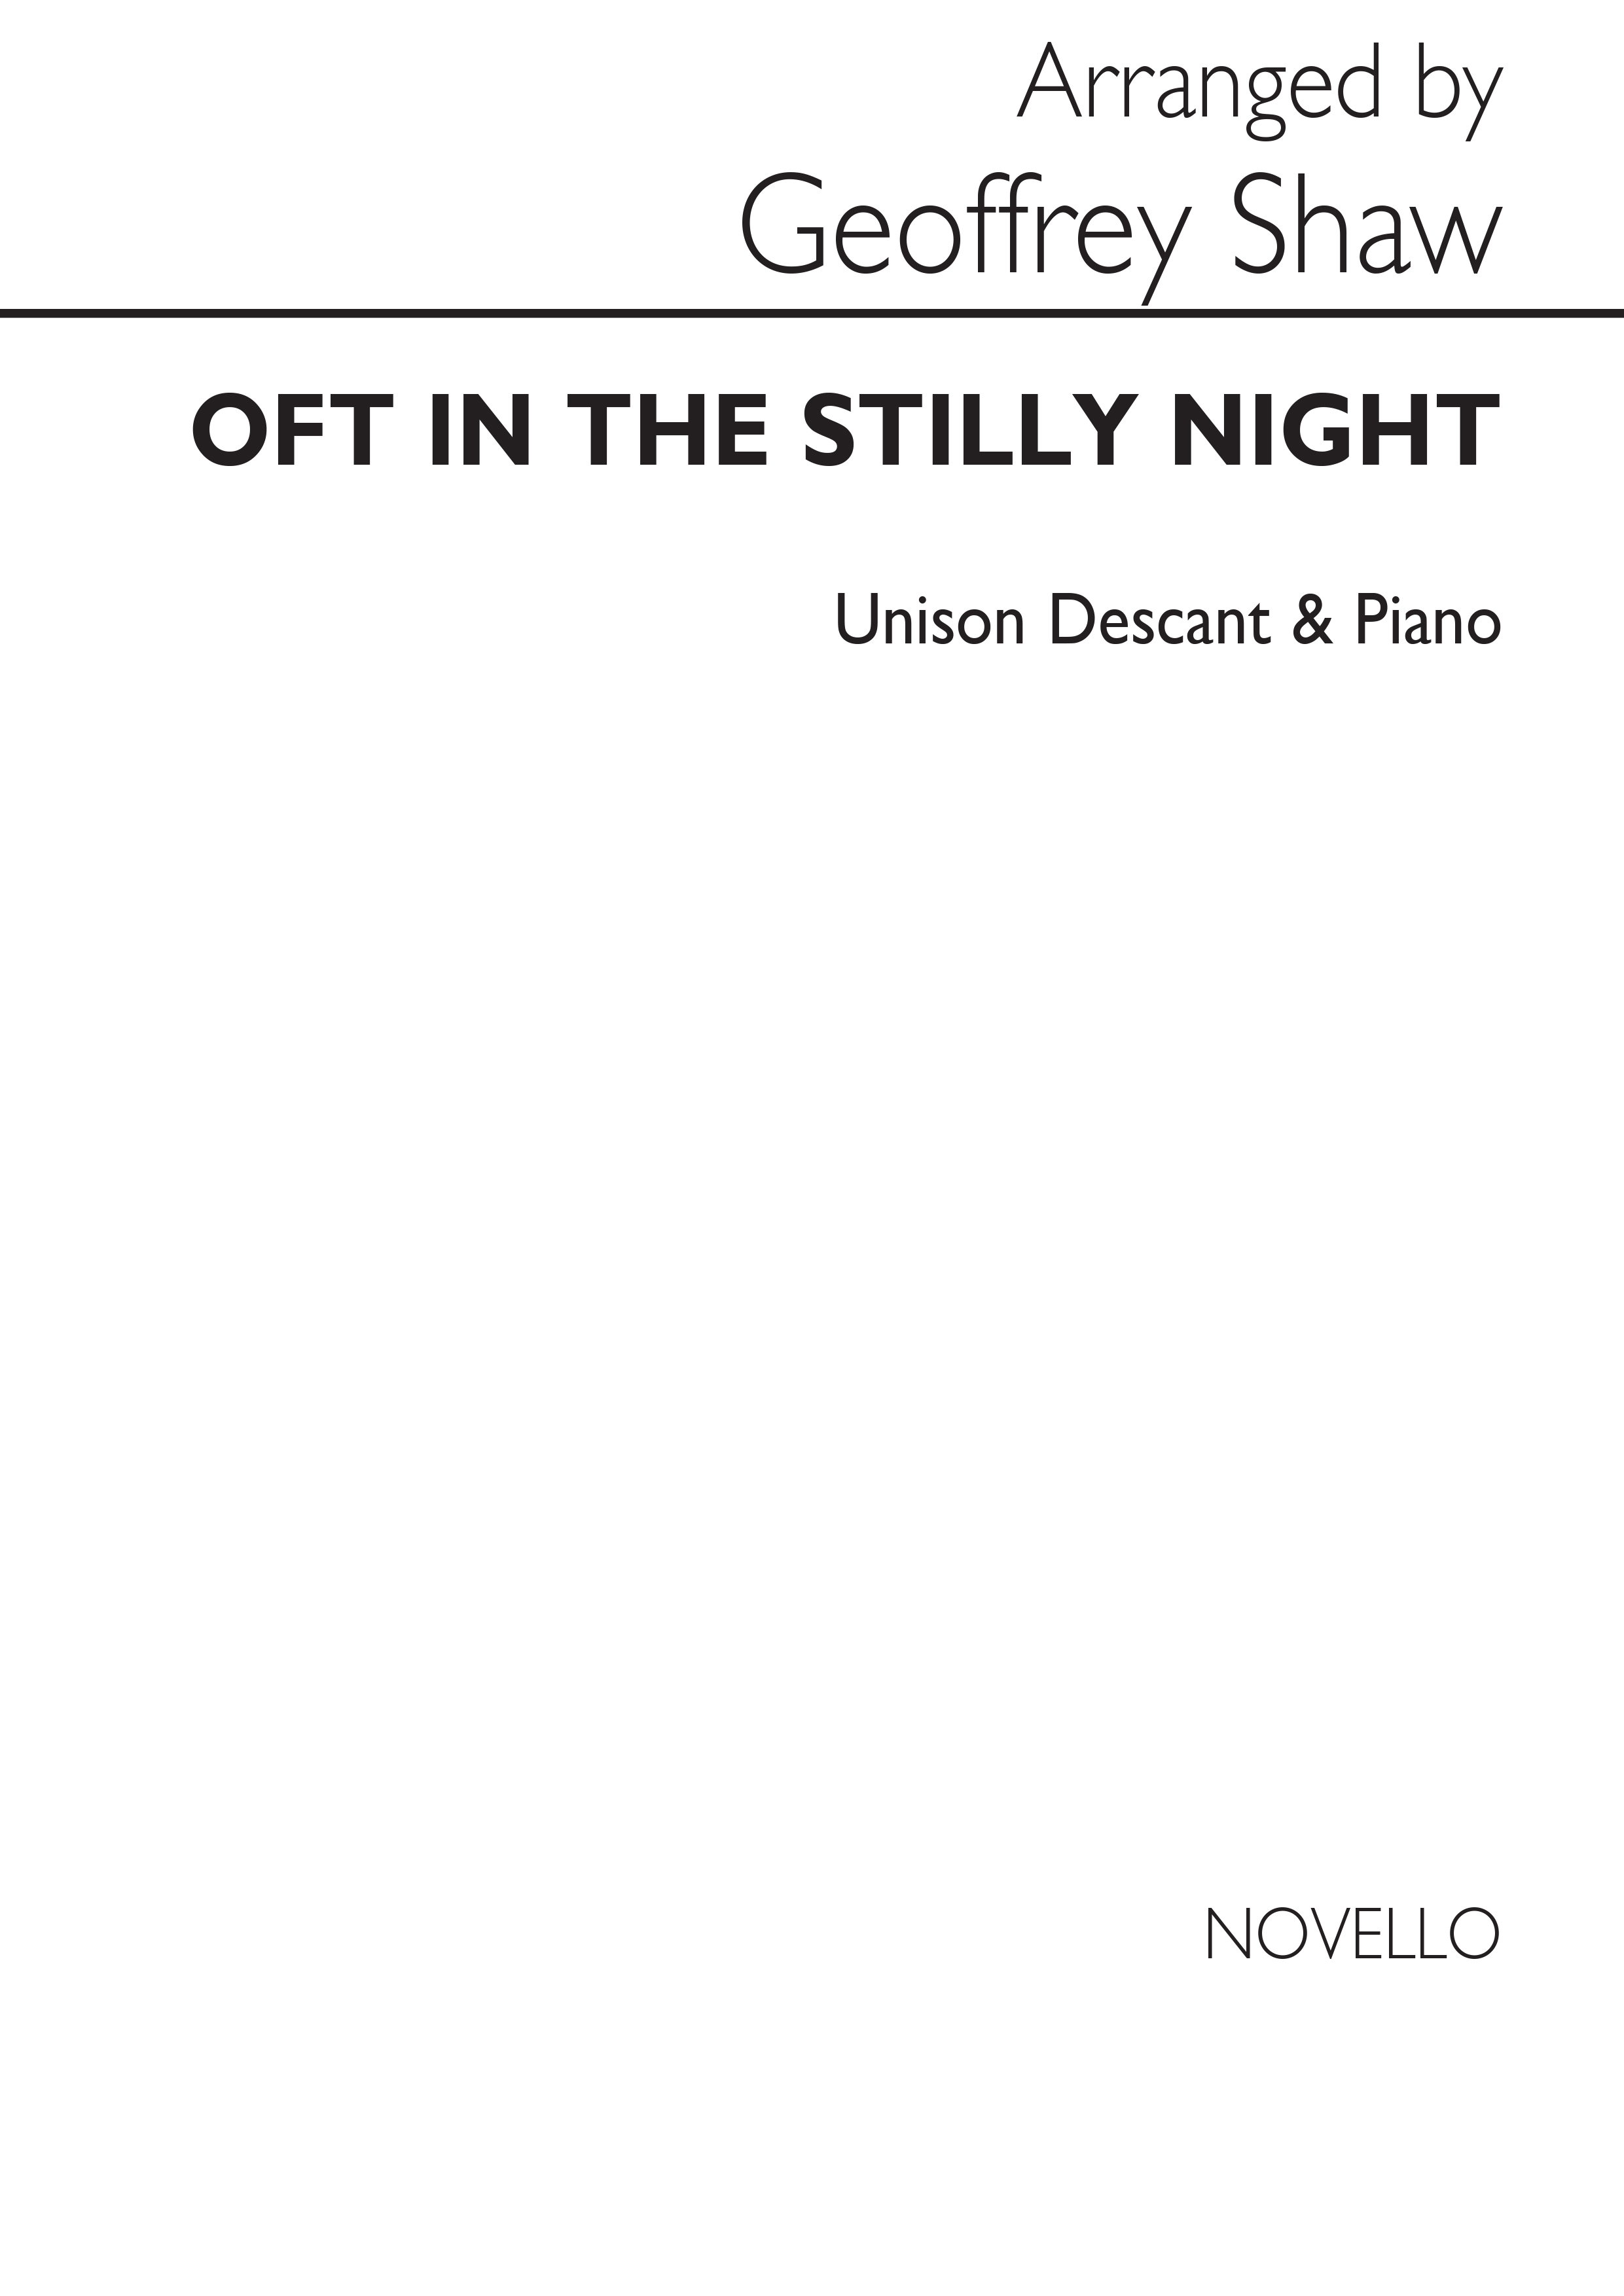 Shaw, G Oft In The Stilly Night Unison/Descant/Piano